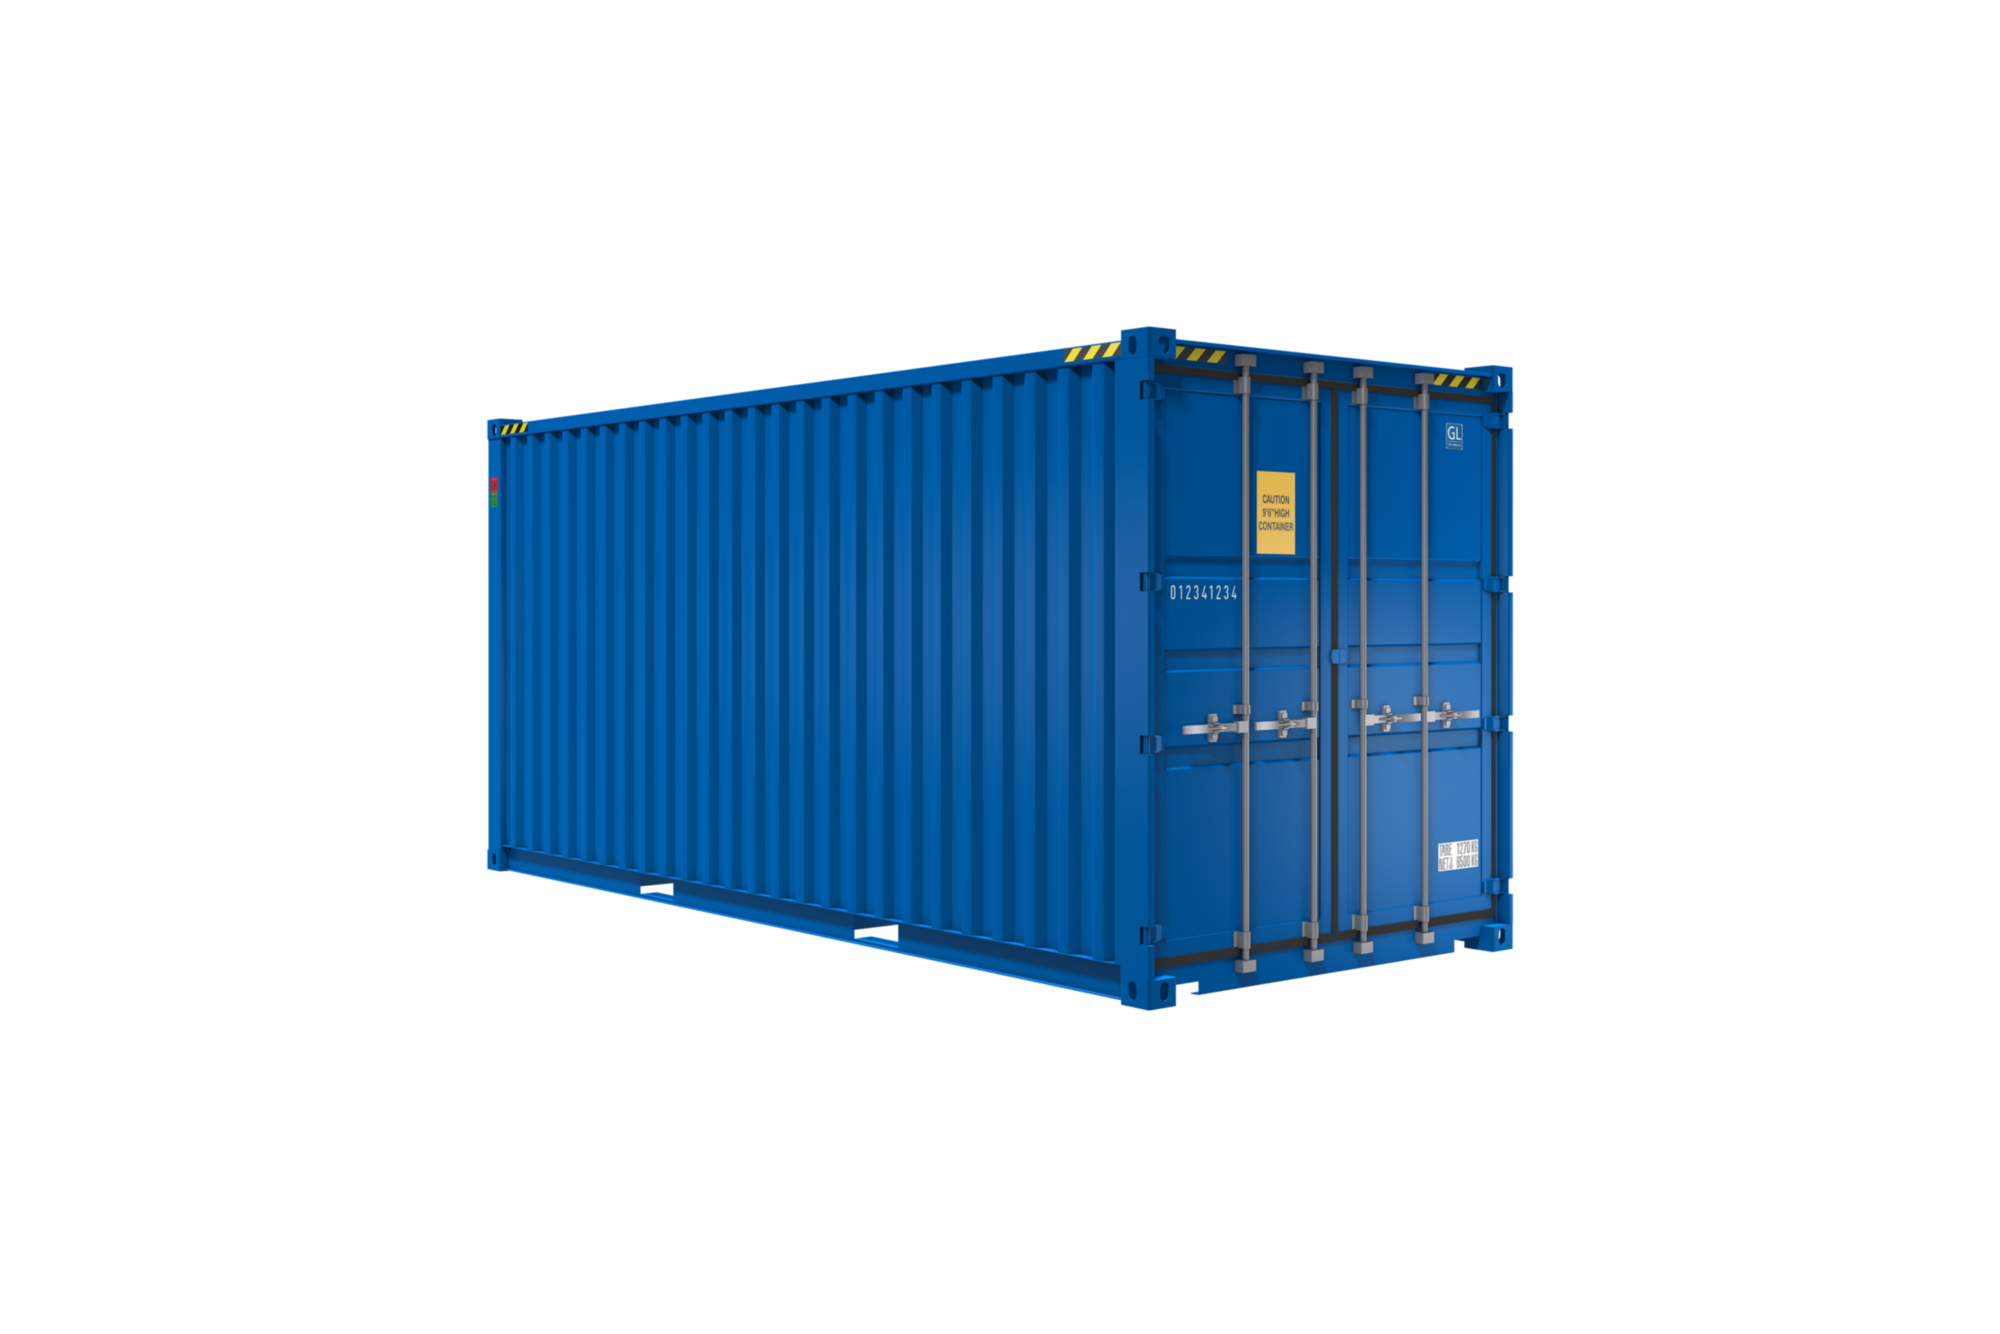 20’ HC CONTAINEX shippingcontainer